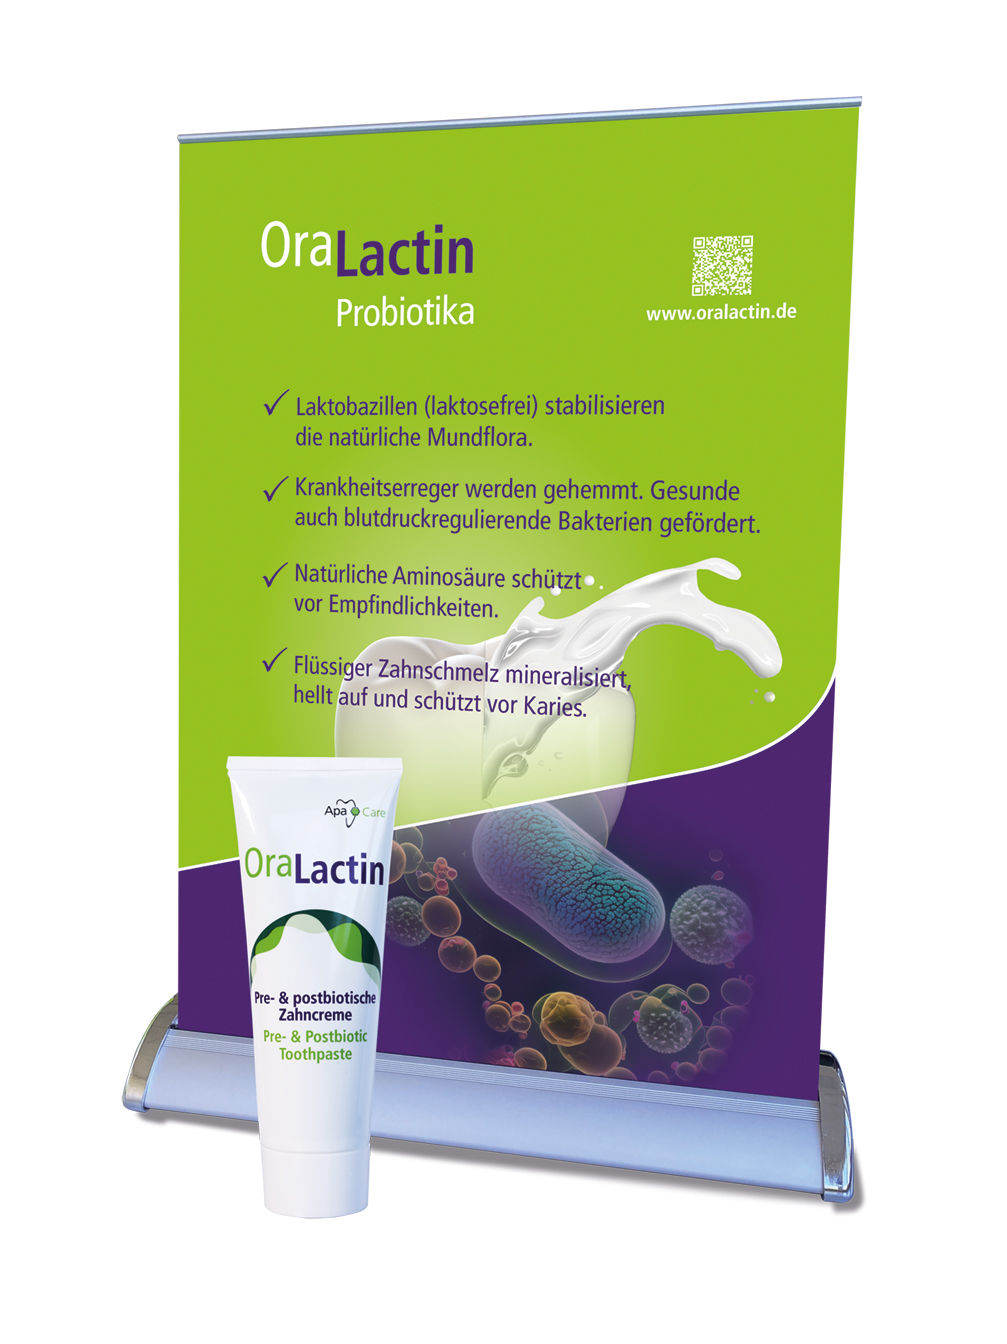  OraLactin Promo package pre- and postbiotic toothpaste 27 pcs.